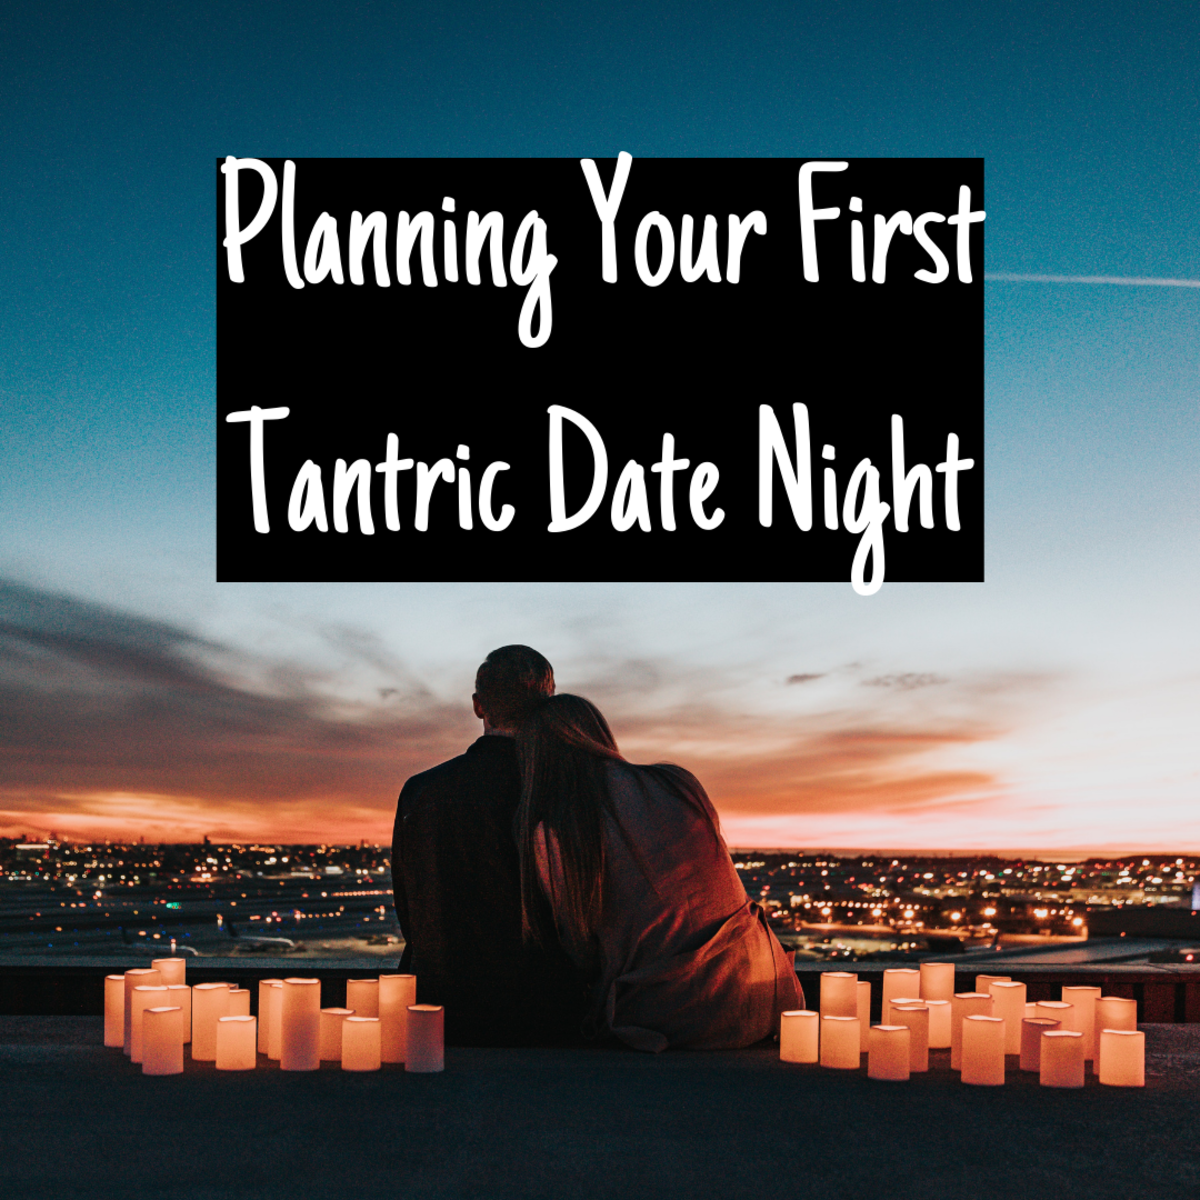 How to Plan Your First Tantric Date Night